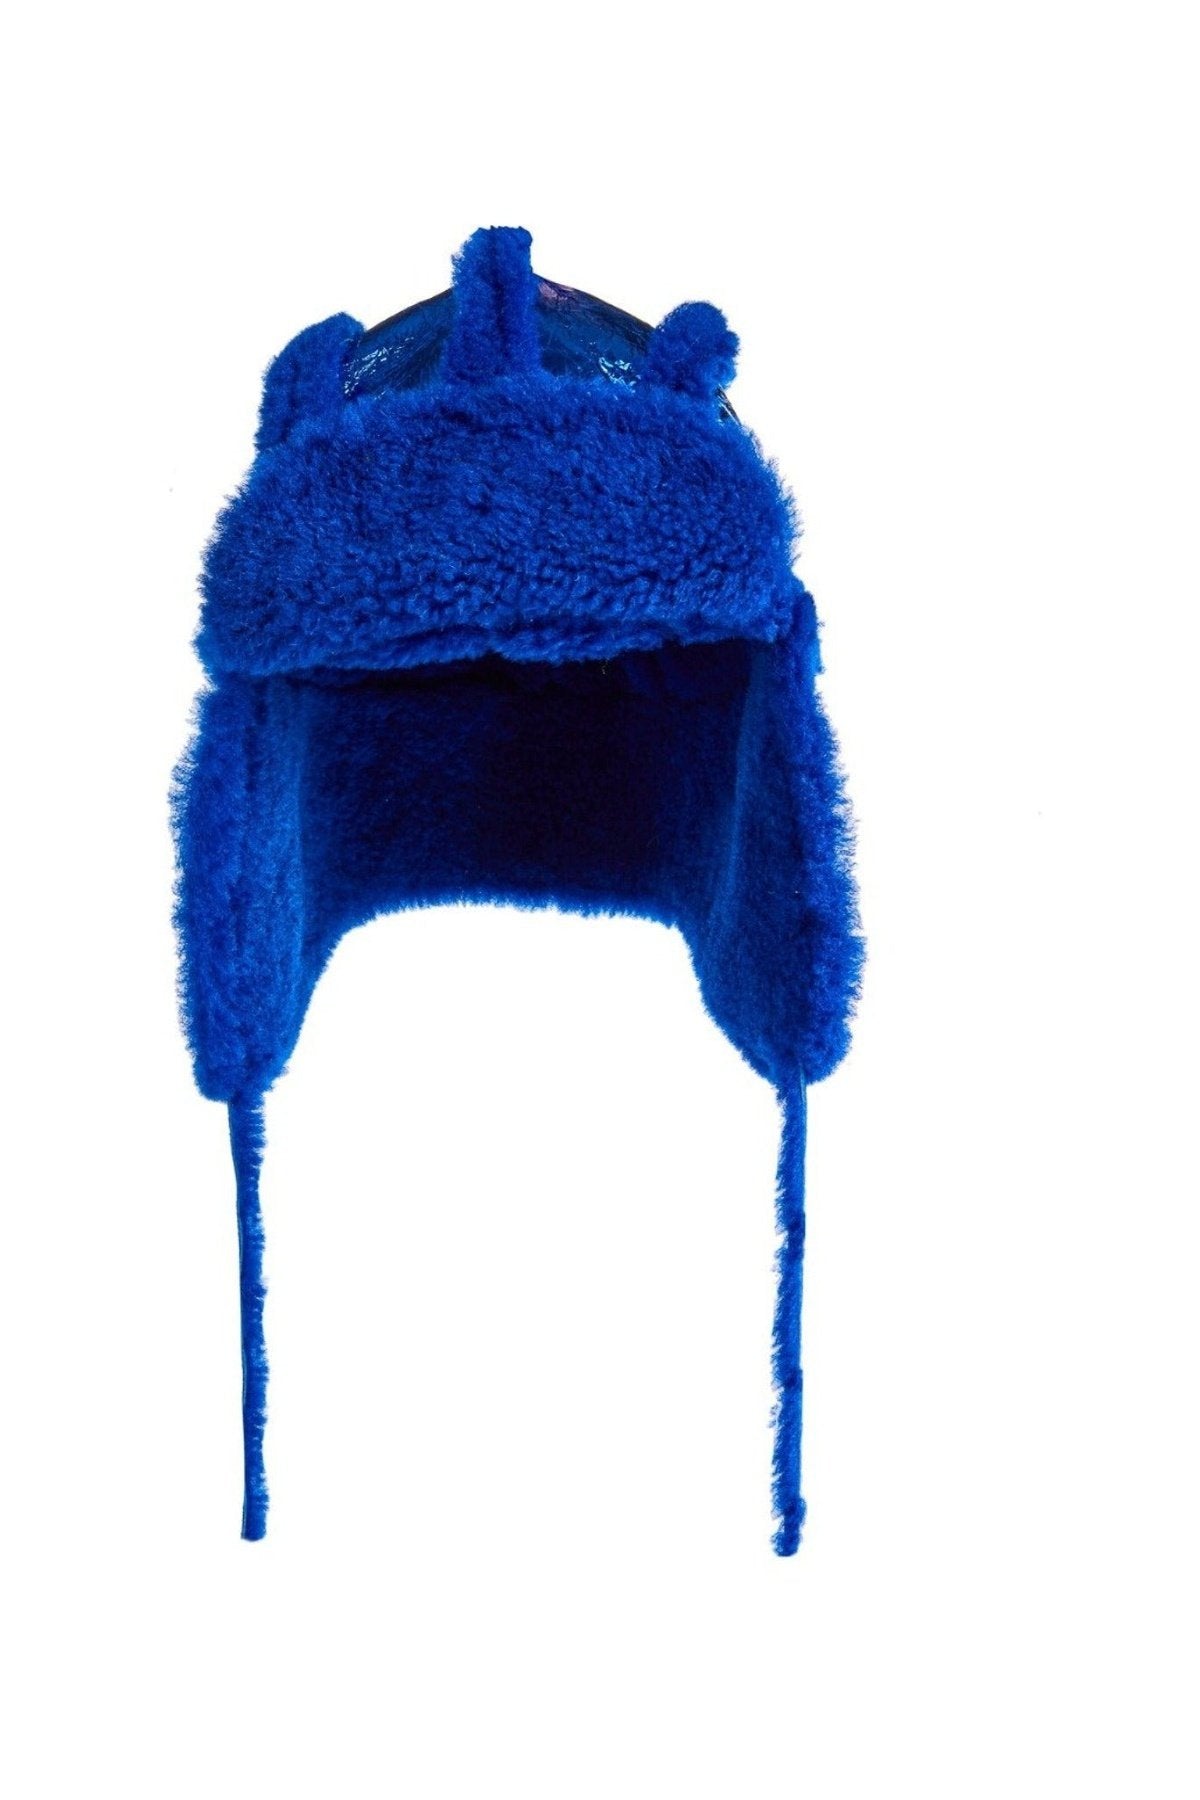 M'A KIDS EAR COVER HAT BLUE LEATHER